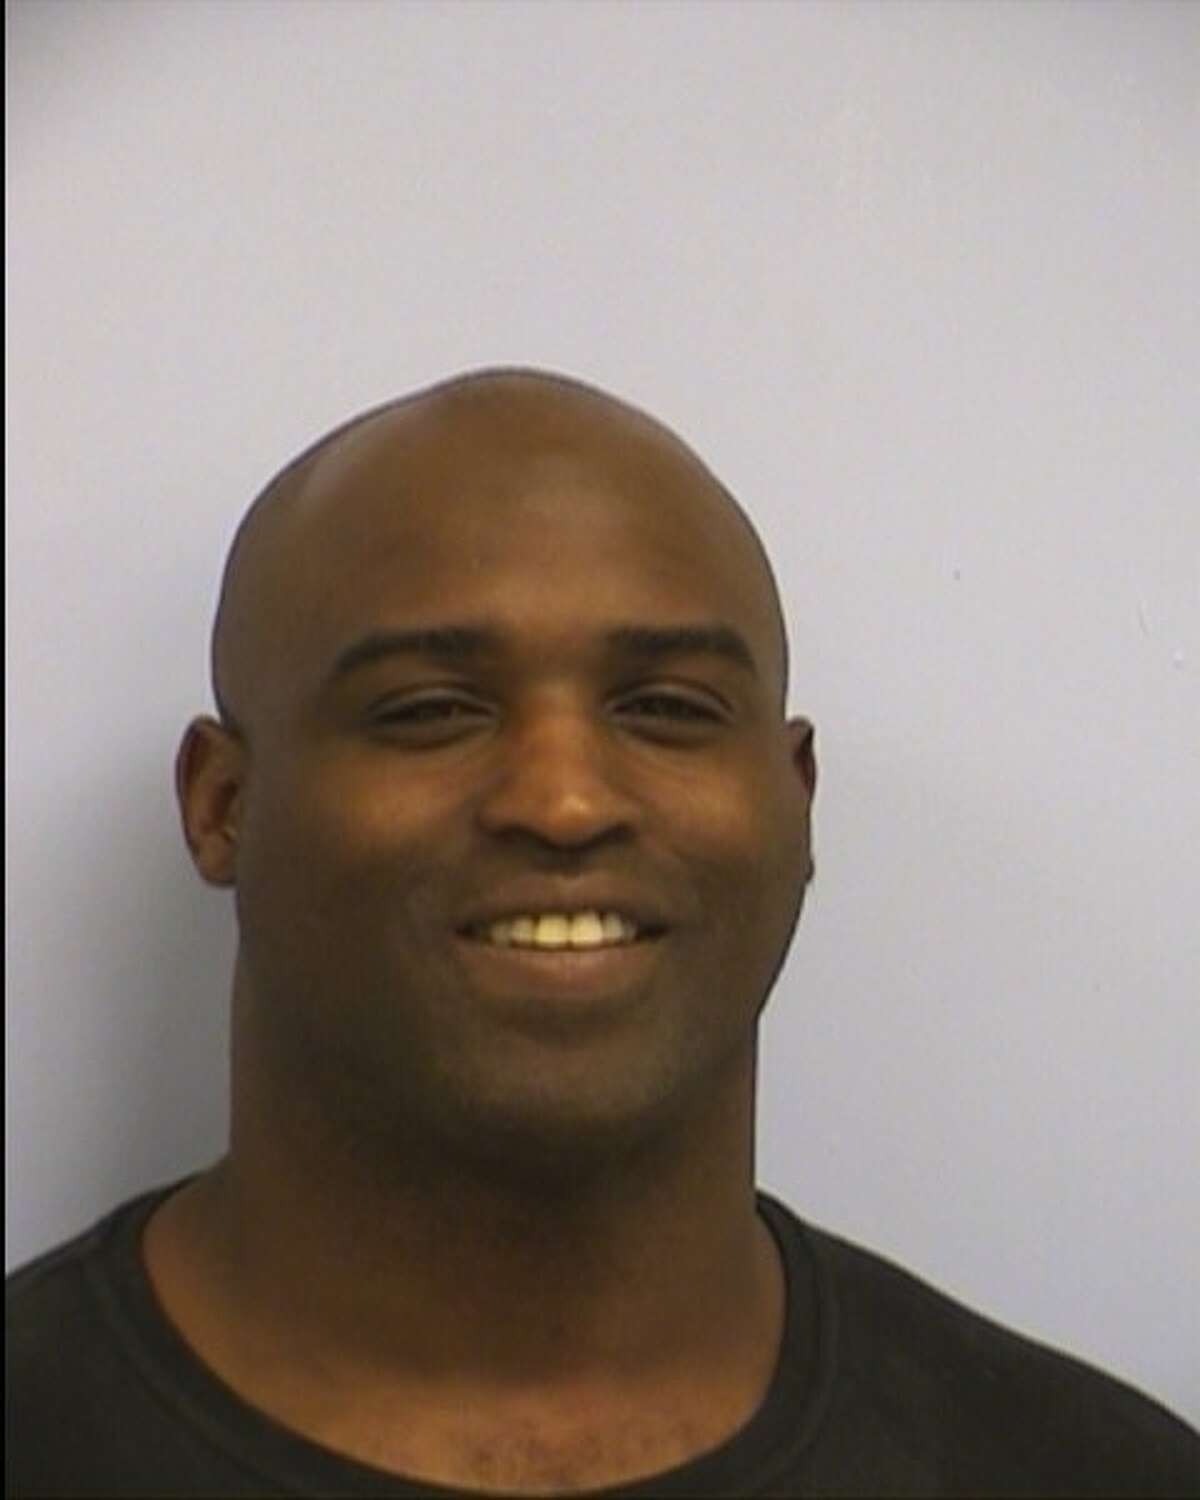 PHOTOS: Heisman trophy winners with ties to Texas Former Longhorns running back Ricky Williams was arrested on Tuesday, Sept. 19, 2017, for traffic warrants.